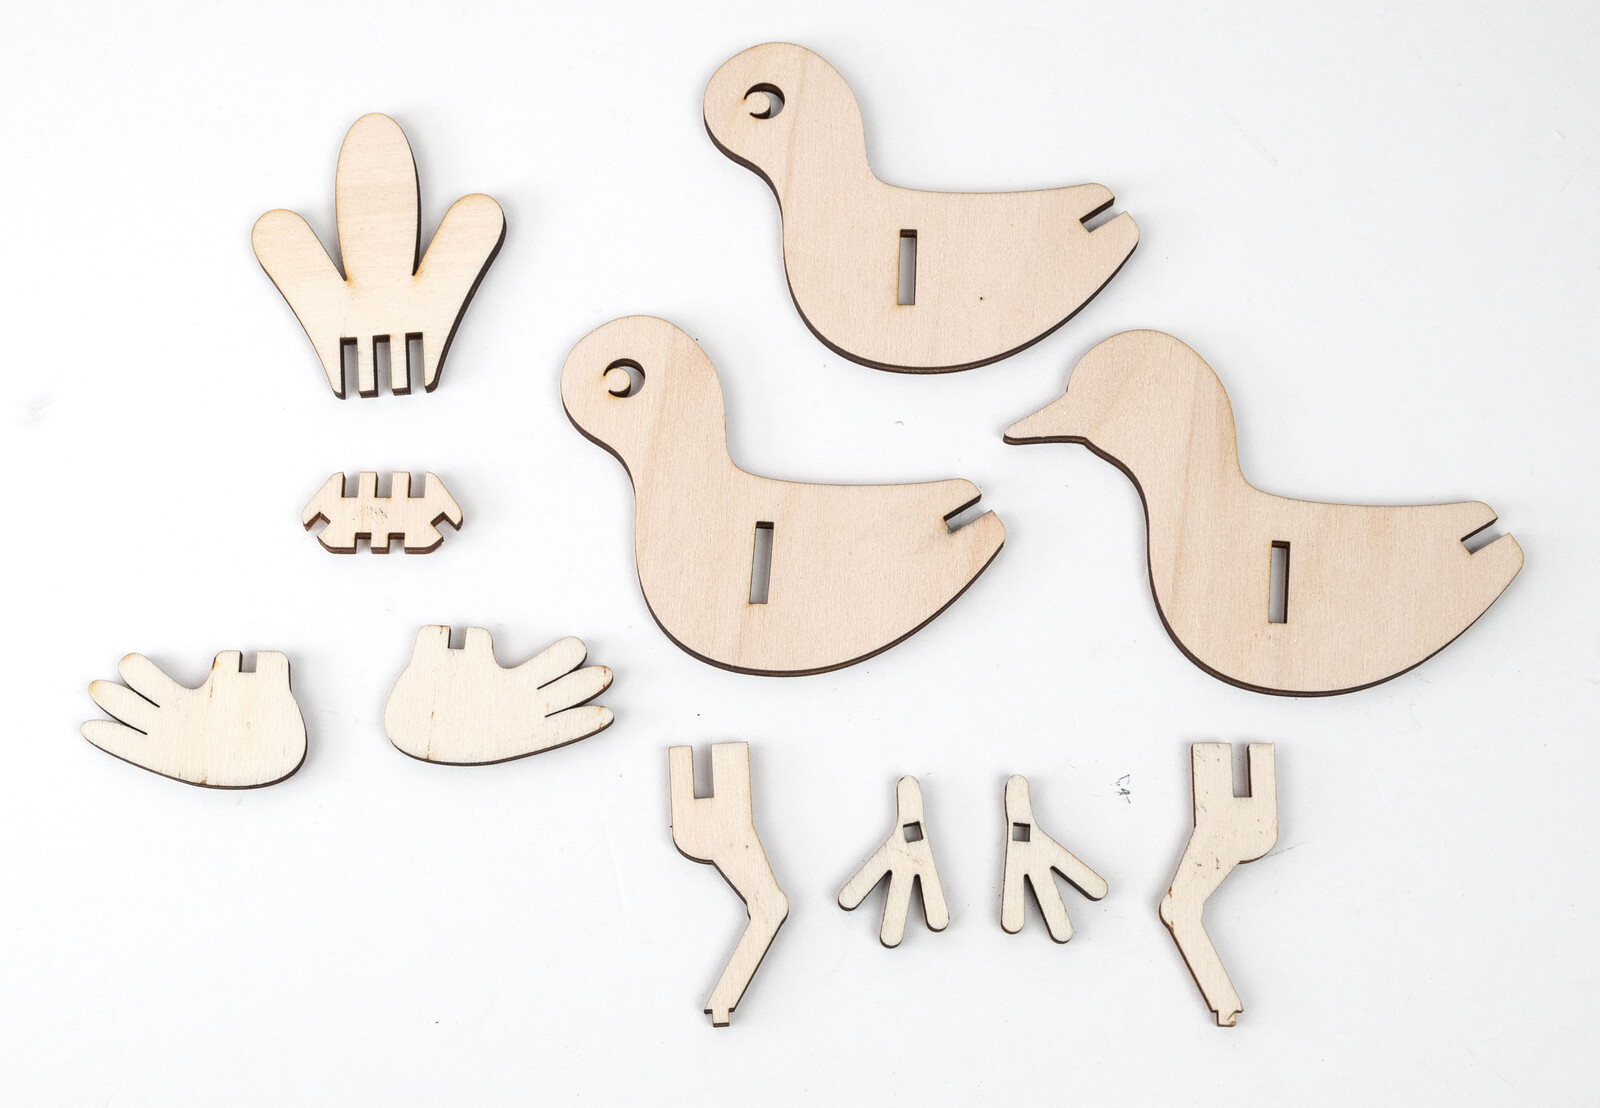 Parts cut out on the laser cutter from 3mm plywood